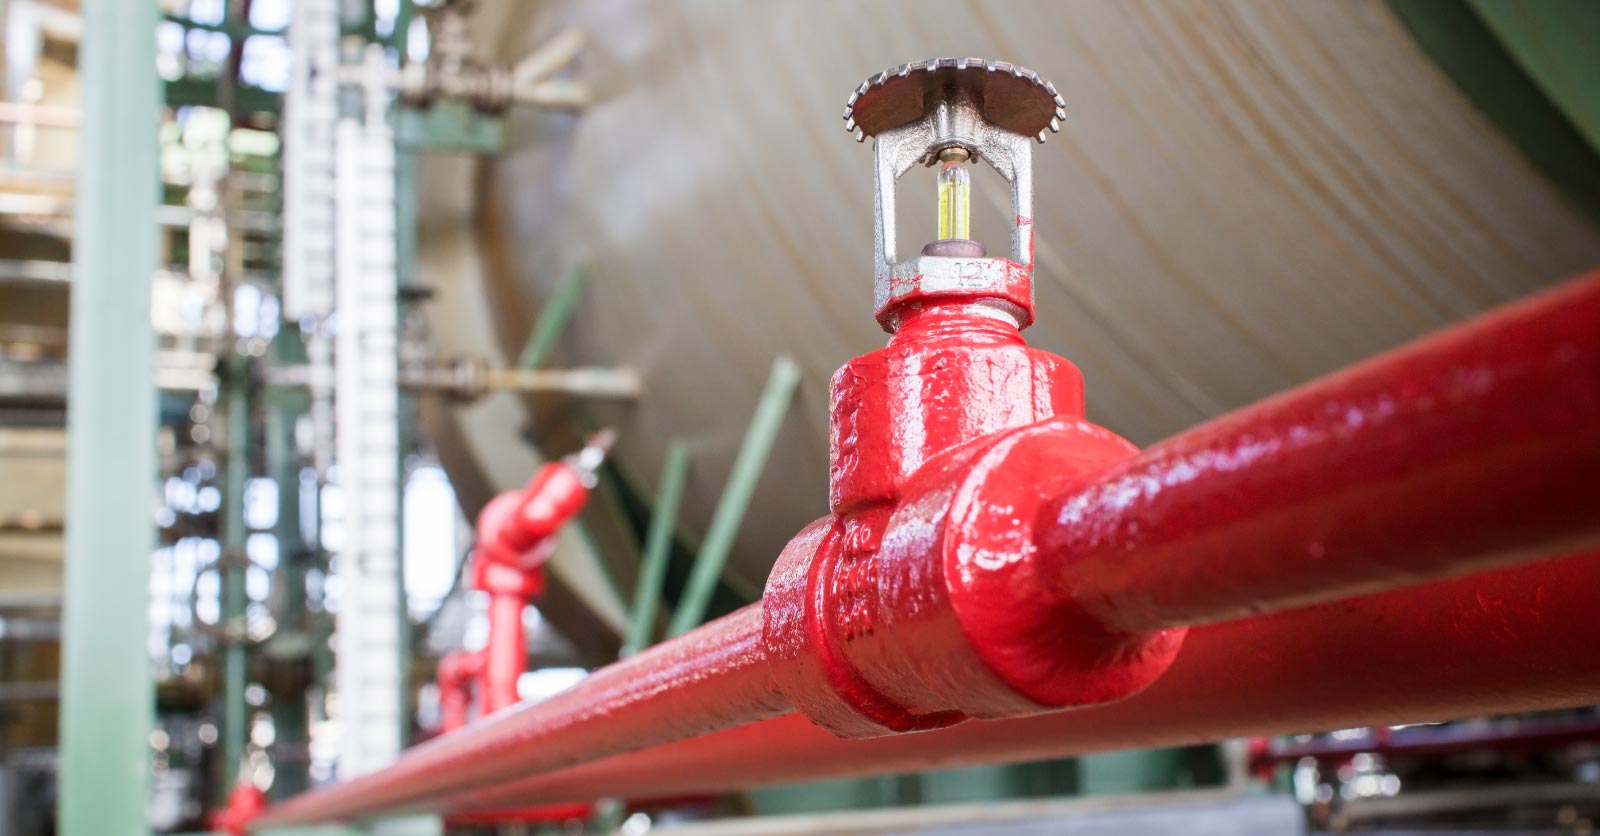 ARE YOUR FIRE PROTECTION SPRINKLER SYSTEMS BEING TESTED CORRECTLY?